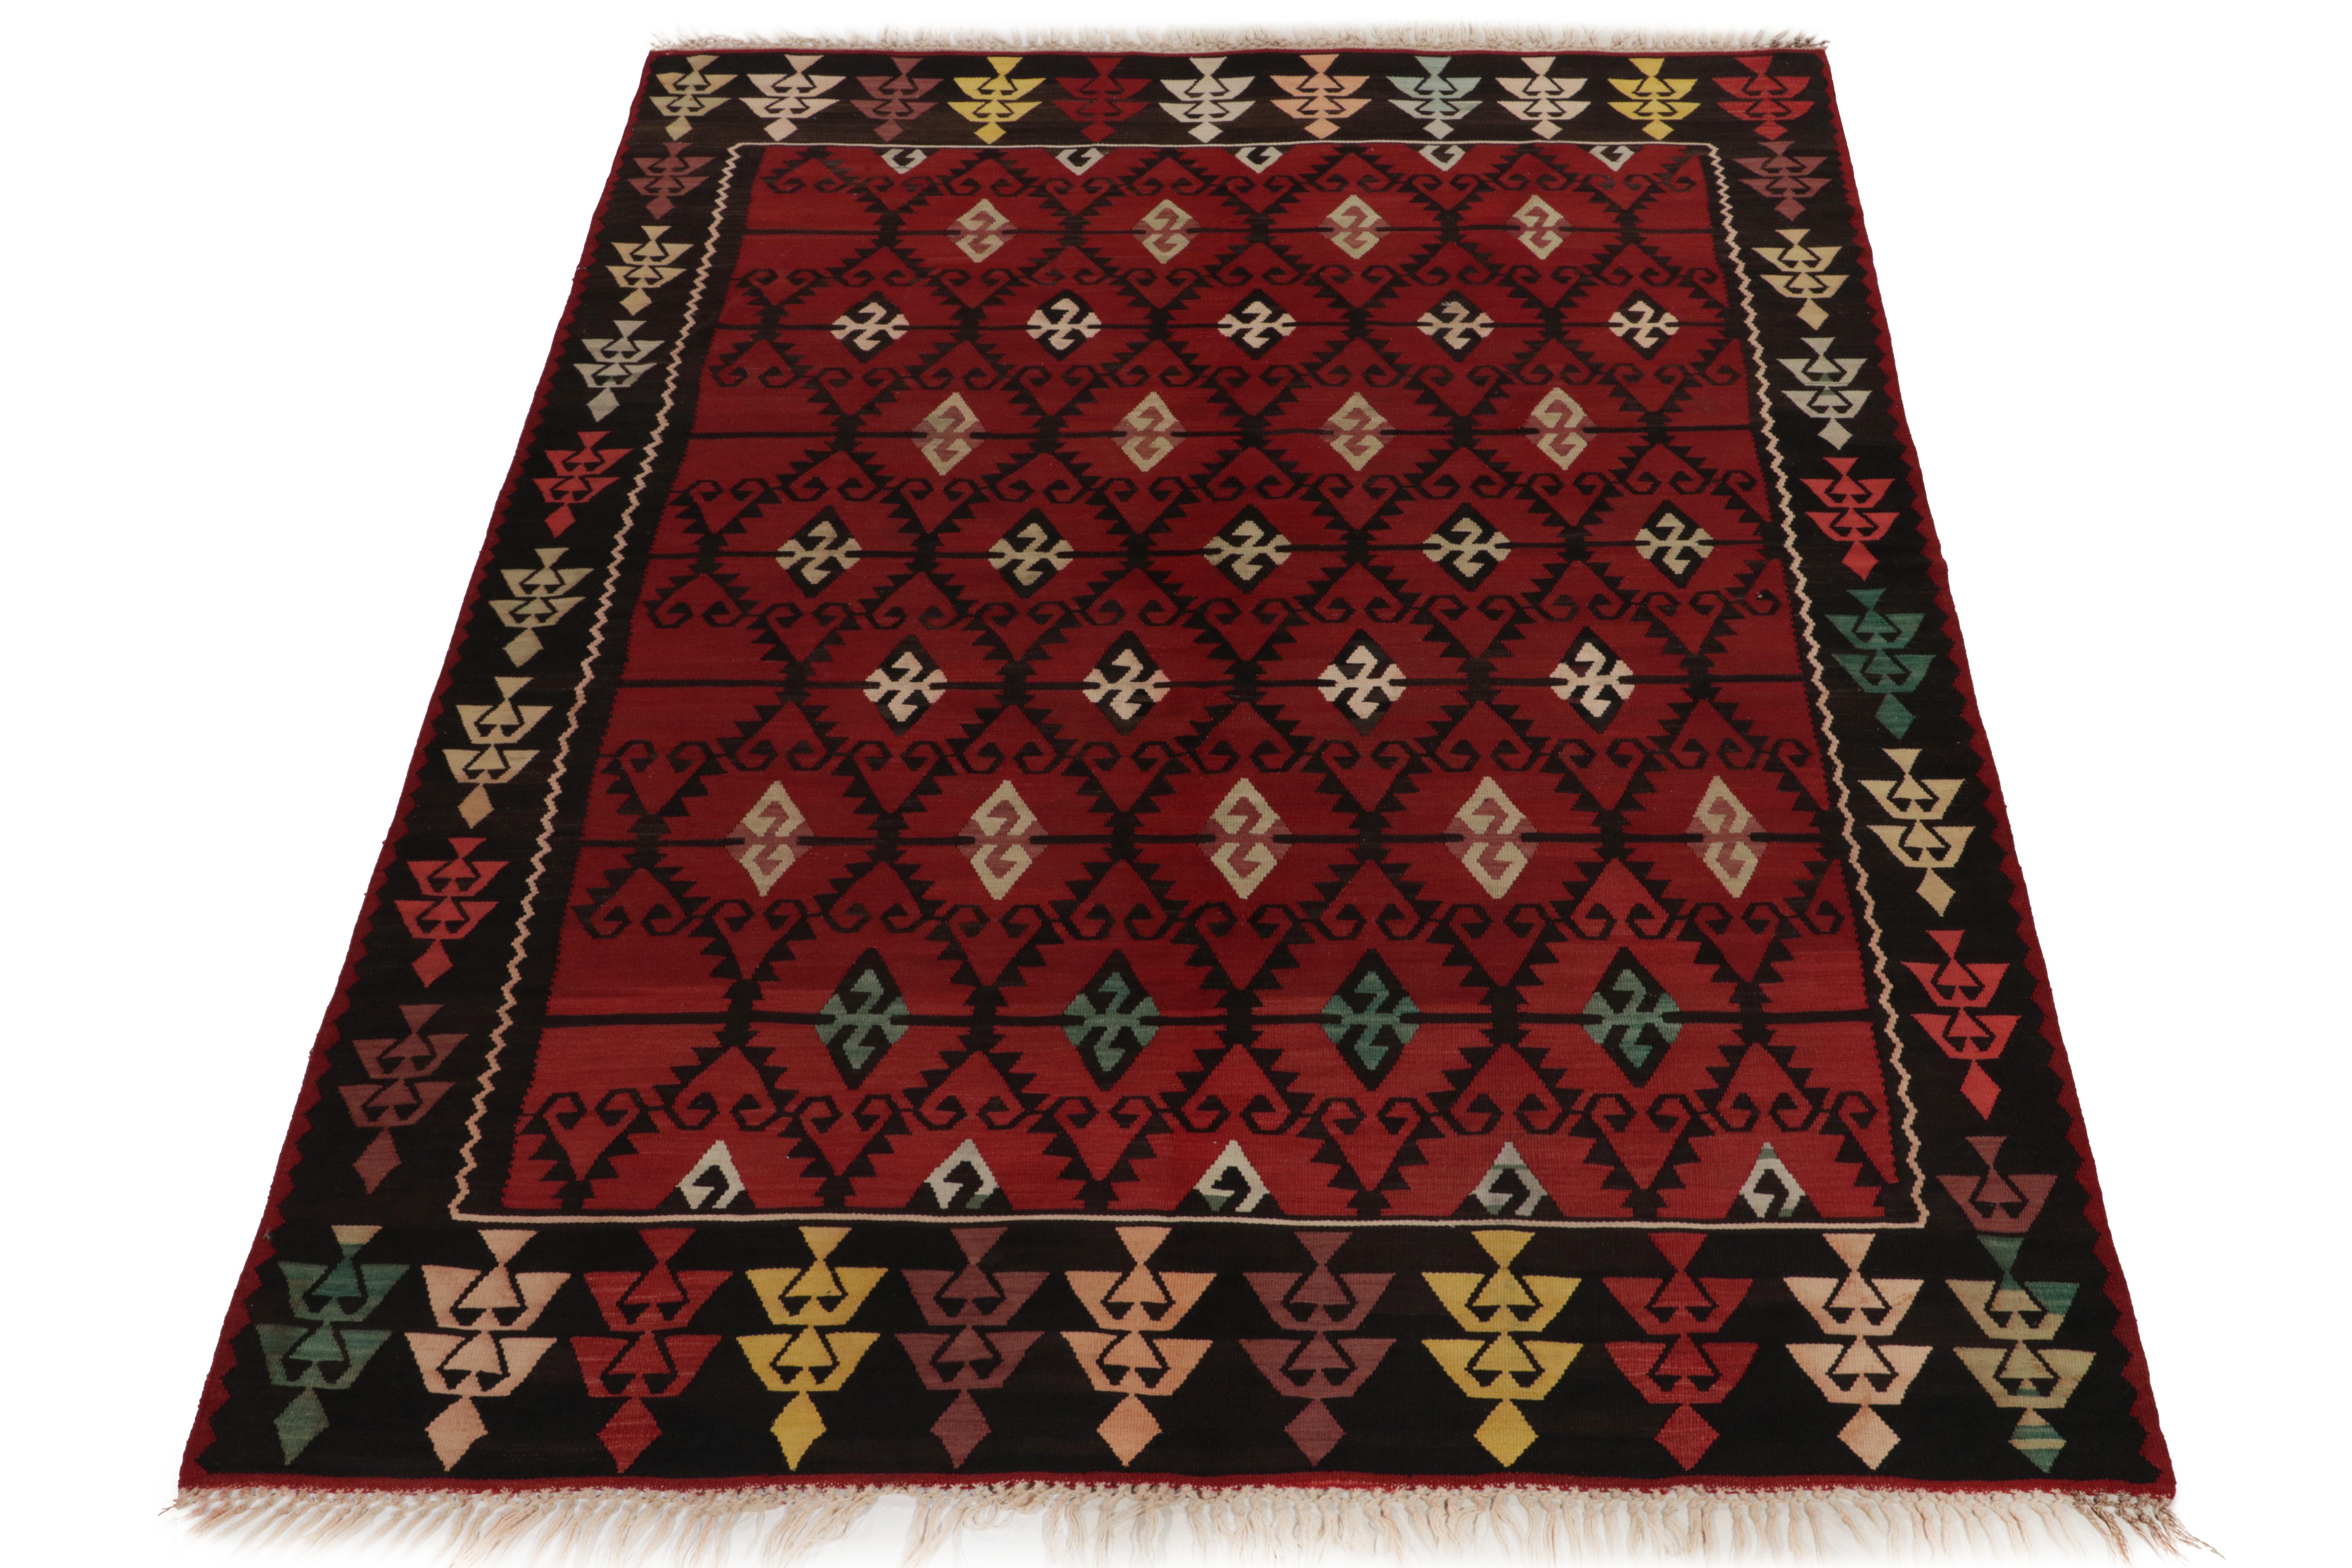 Handwoven in wool, a 7 x 10 antique kilim rug from our flatweave selections. Originating from Turkey circa 1910-1920, this rare Macedonian flat weave style carries nomadic inspiration with a striking diamond pattern in rich red, black accenting to